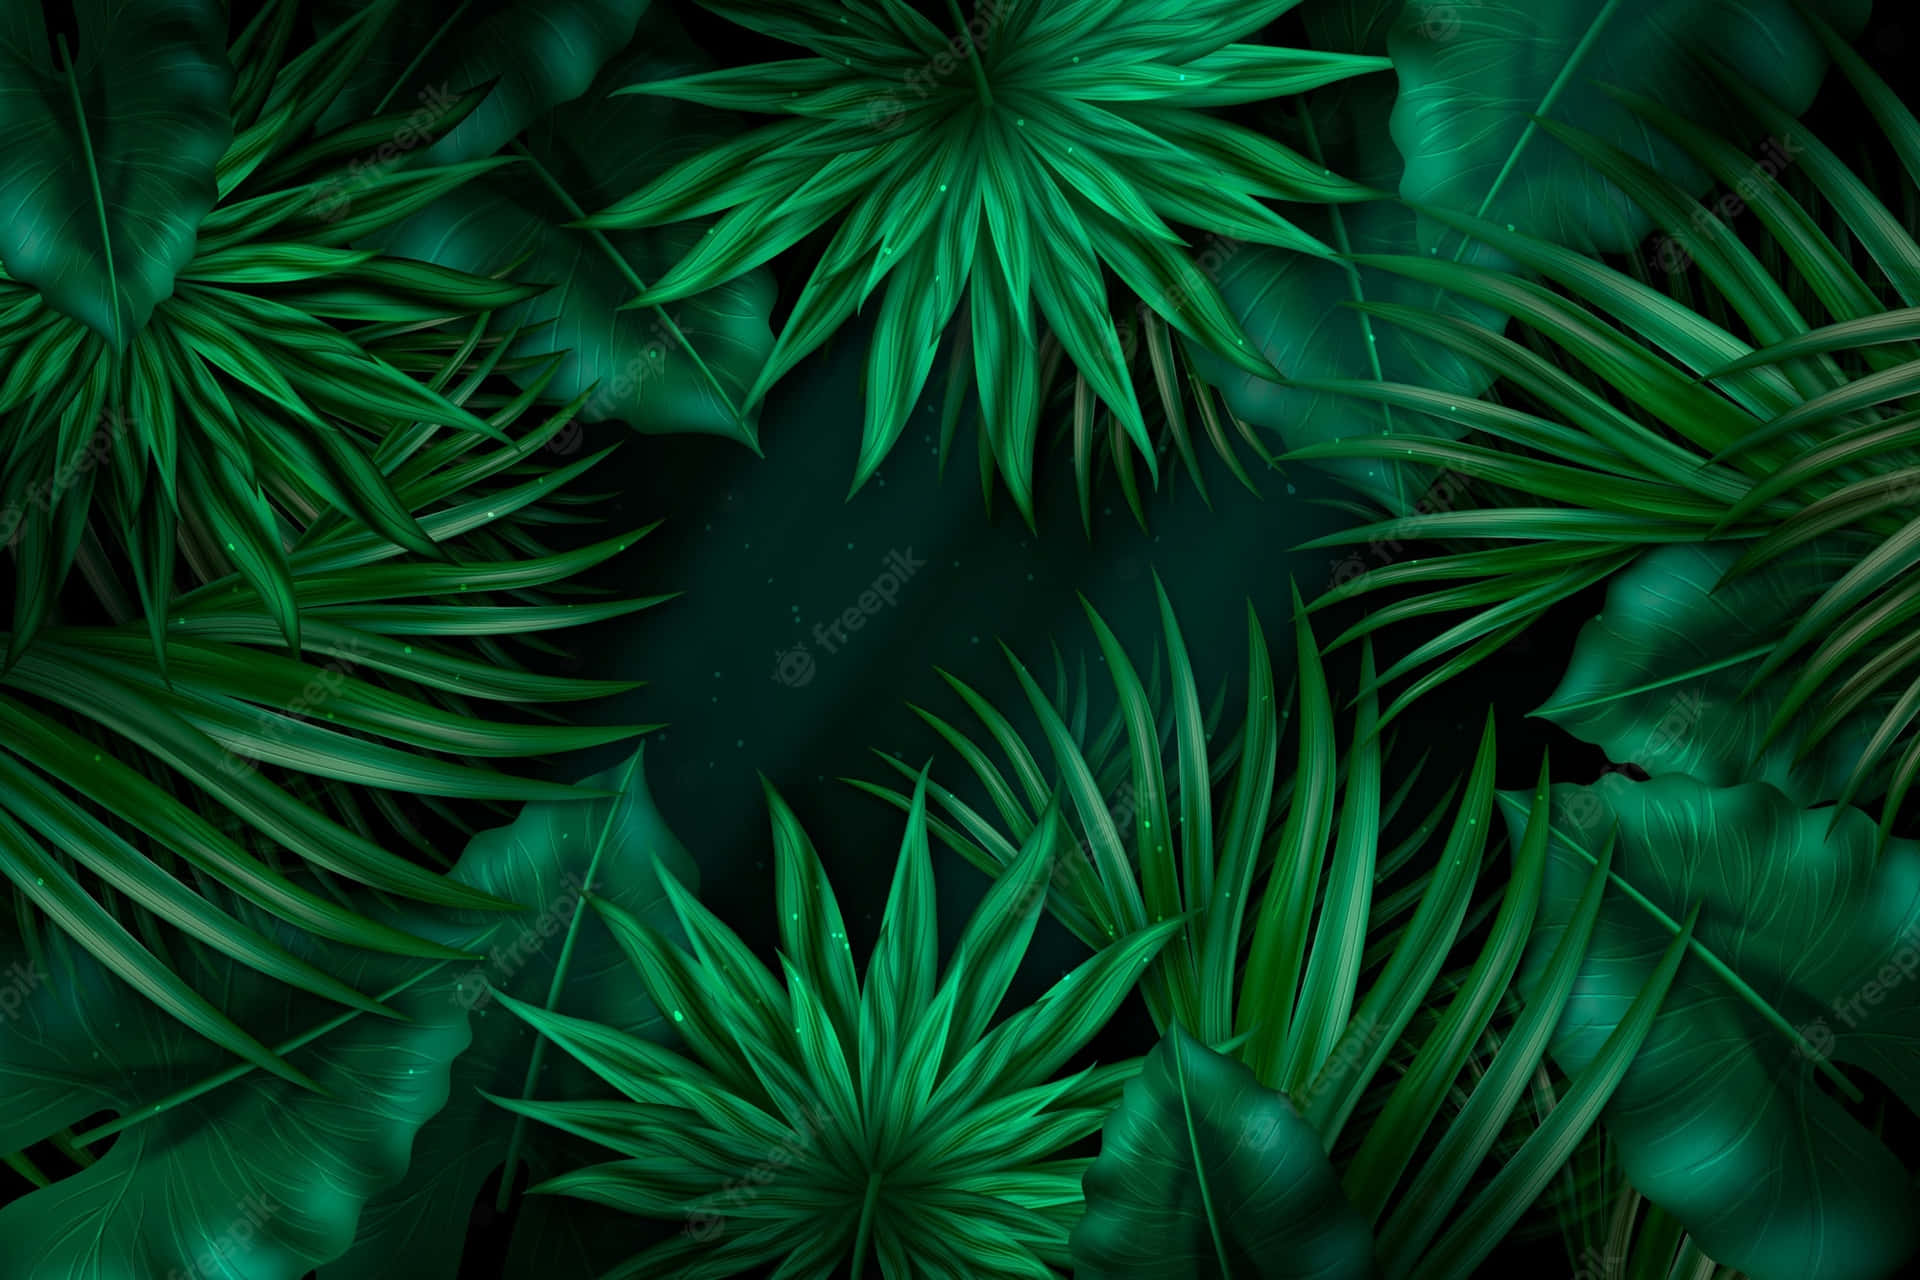 Aesthetic Palm Leaves Clumped Together Wallpaper